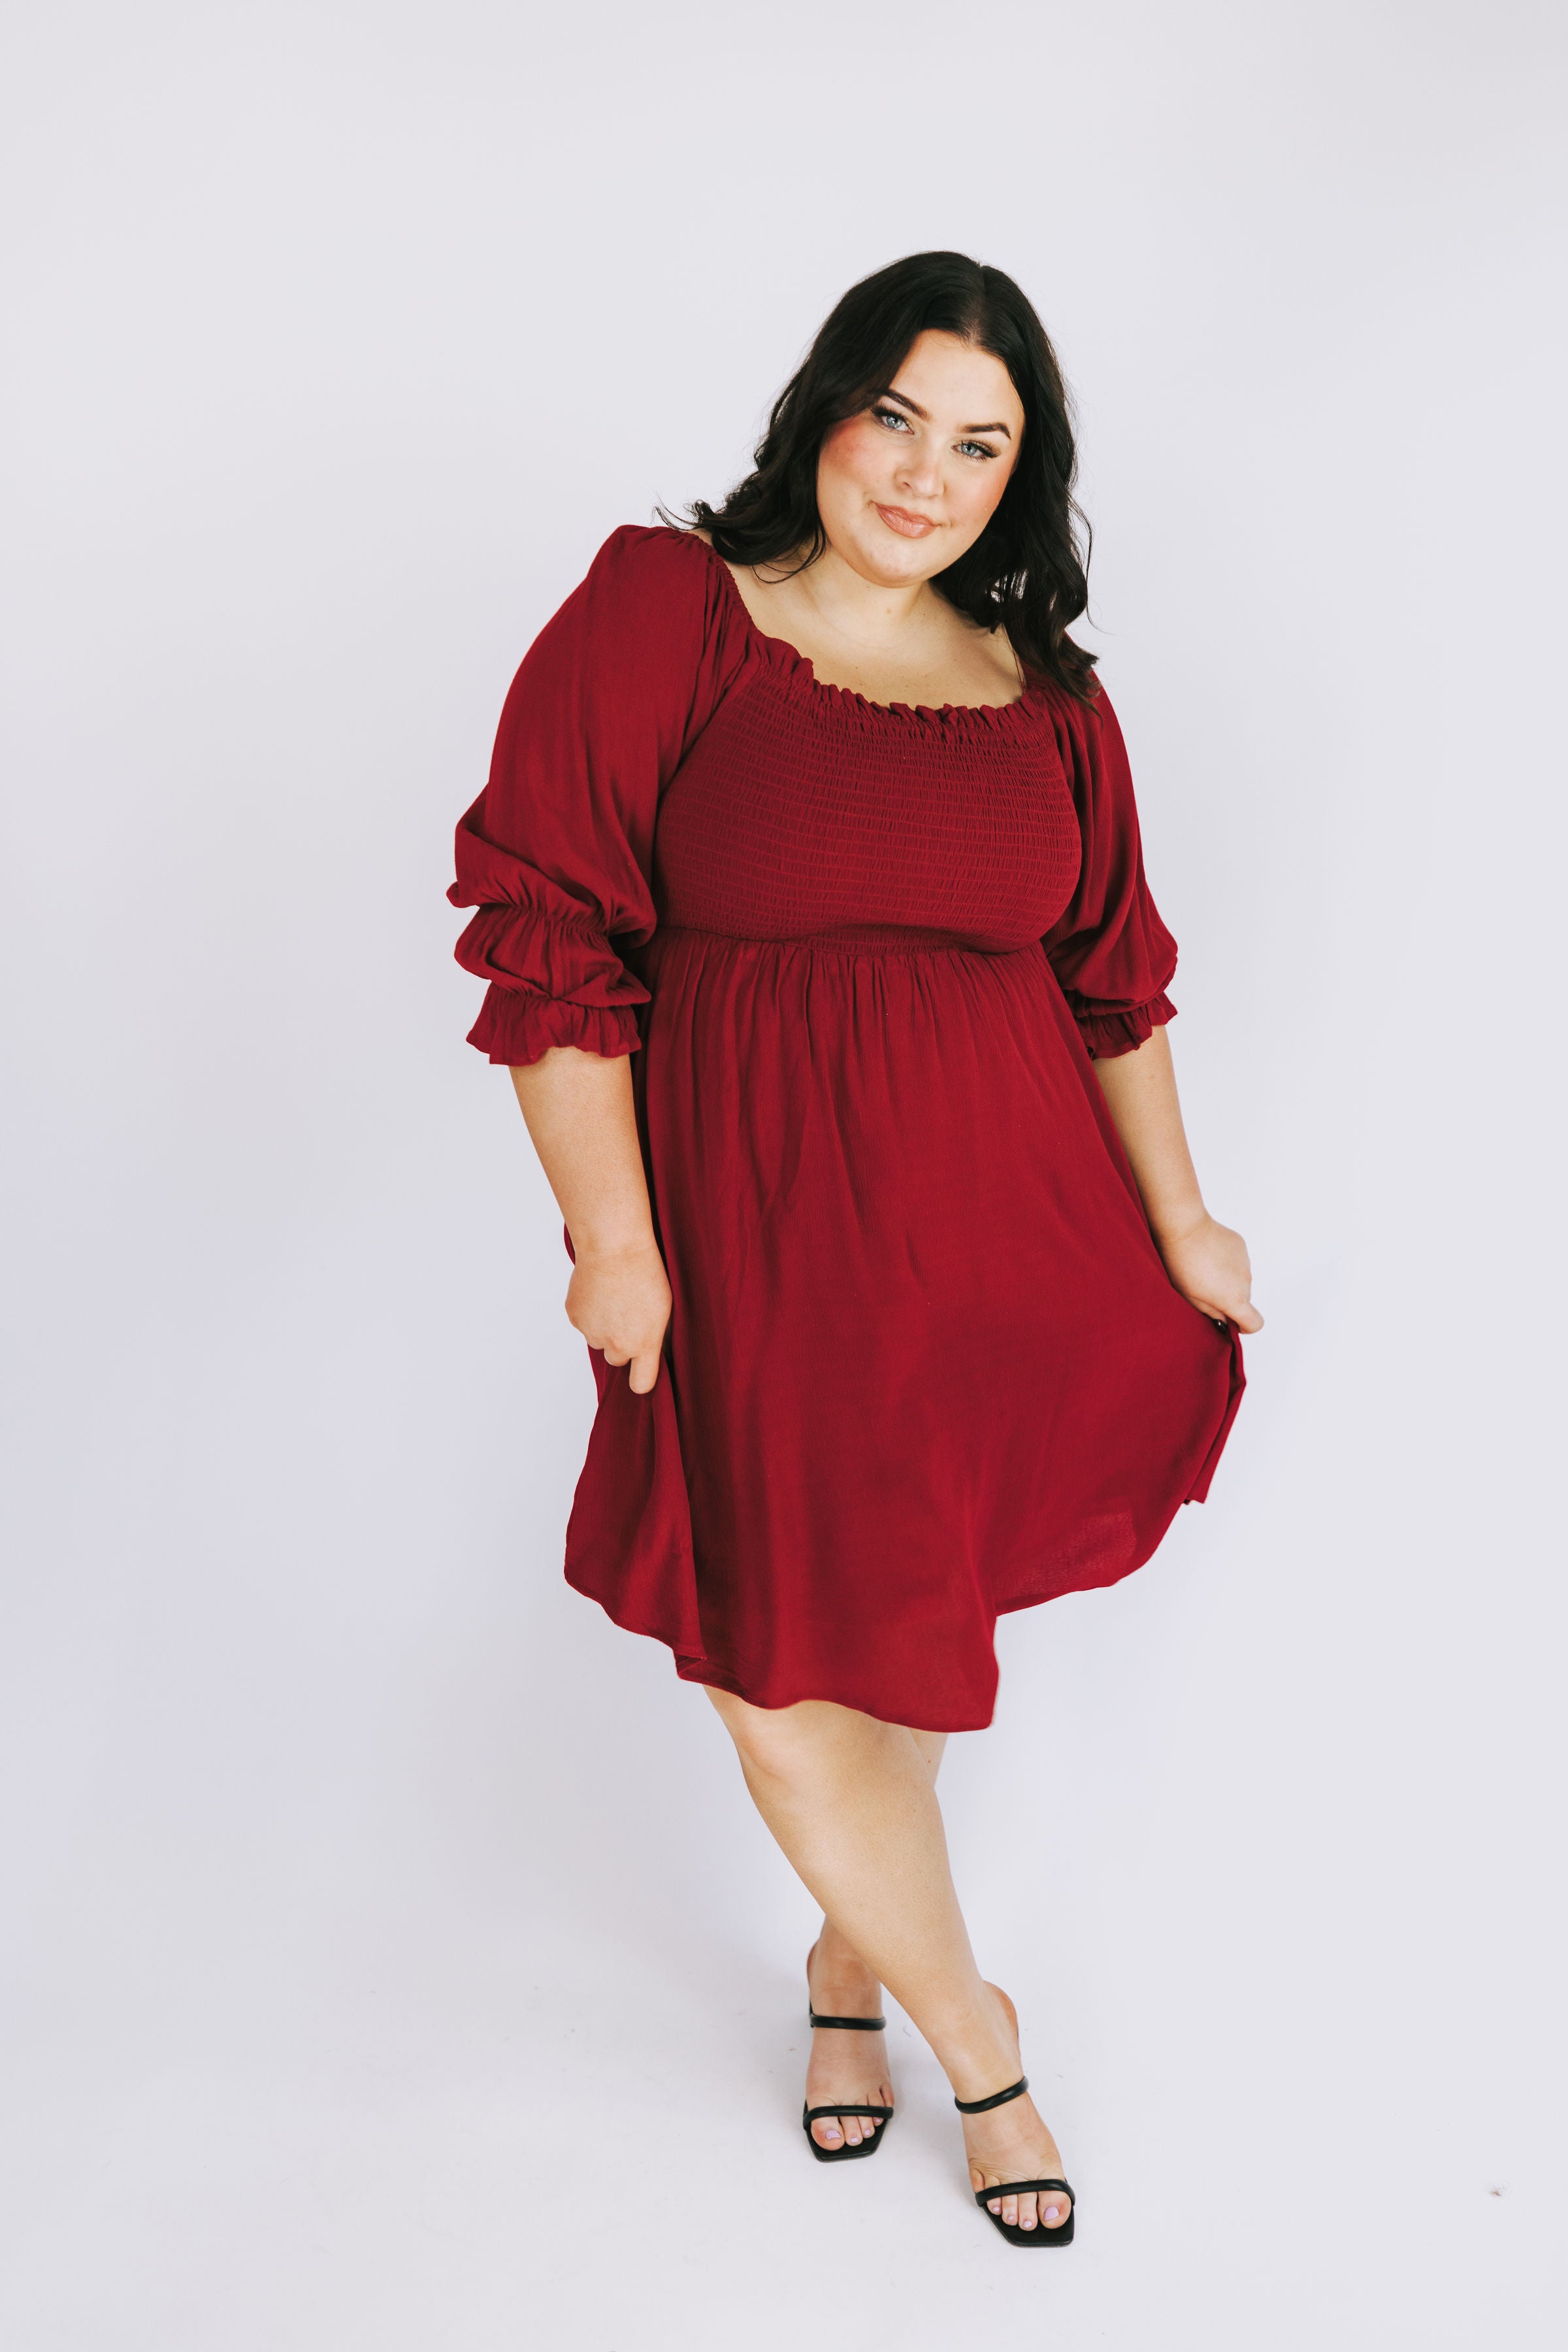 PLUS SIZE - Get To Know You Dress